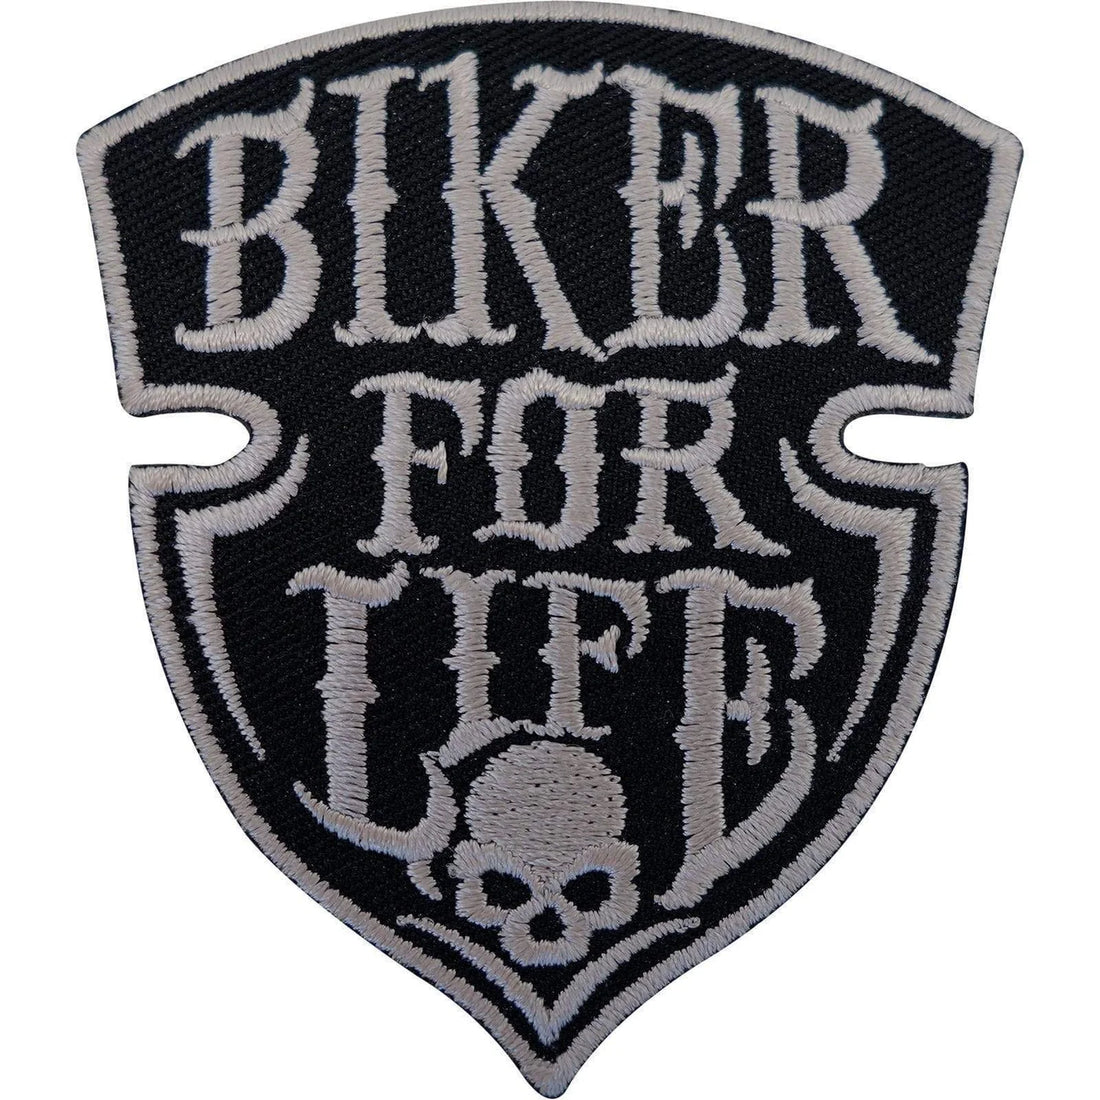 Riding in Style: The Art and Culture of Biker Patches